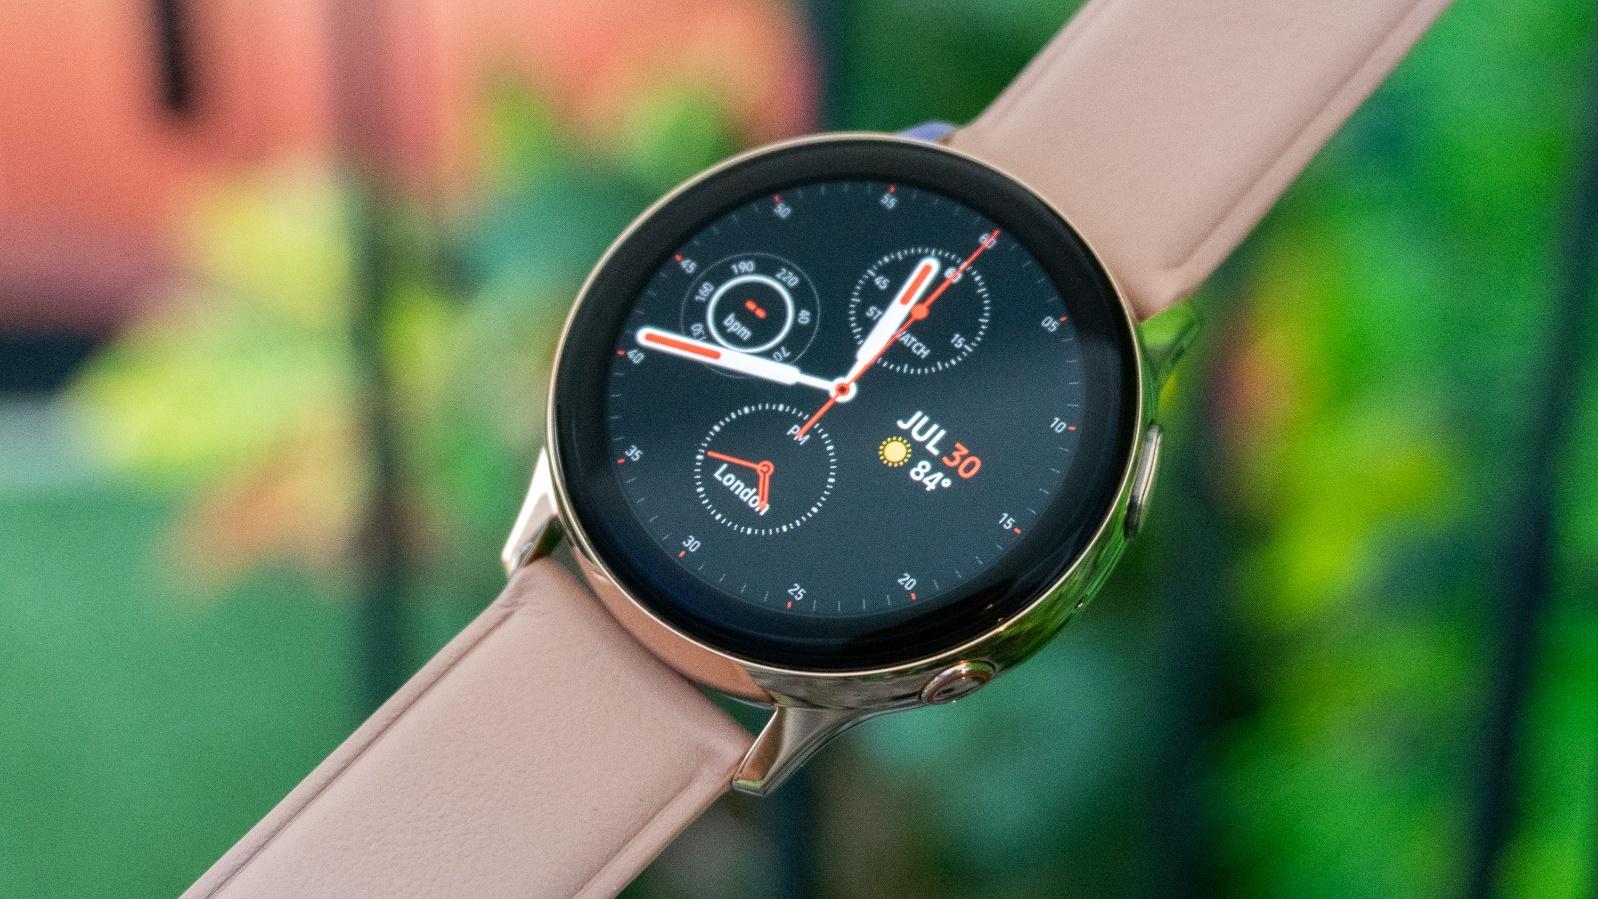 Hands-on with Samsung's Galaxy Watch Active 2: Apple Watch killer?